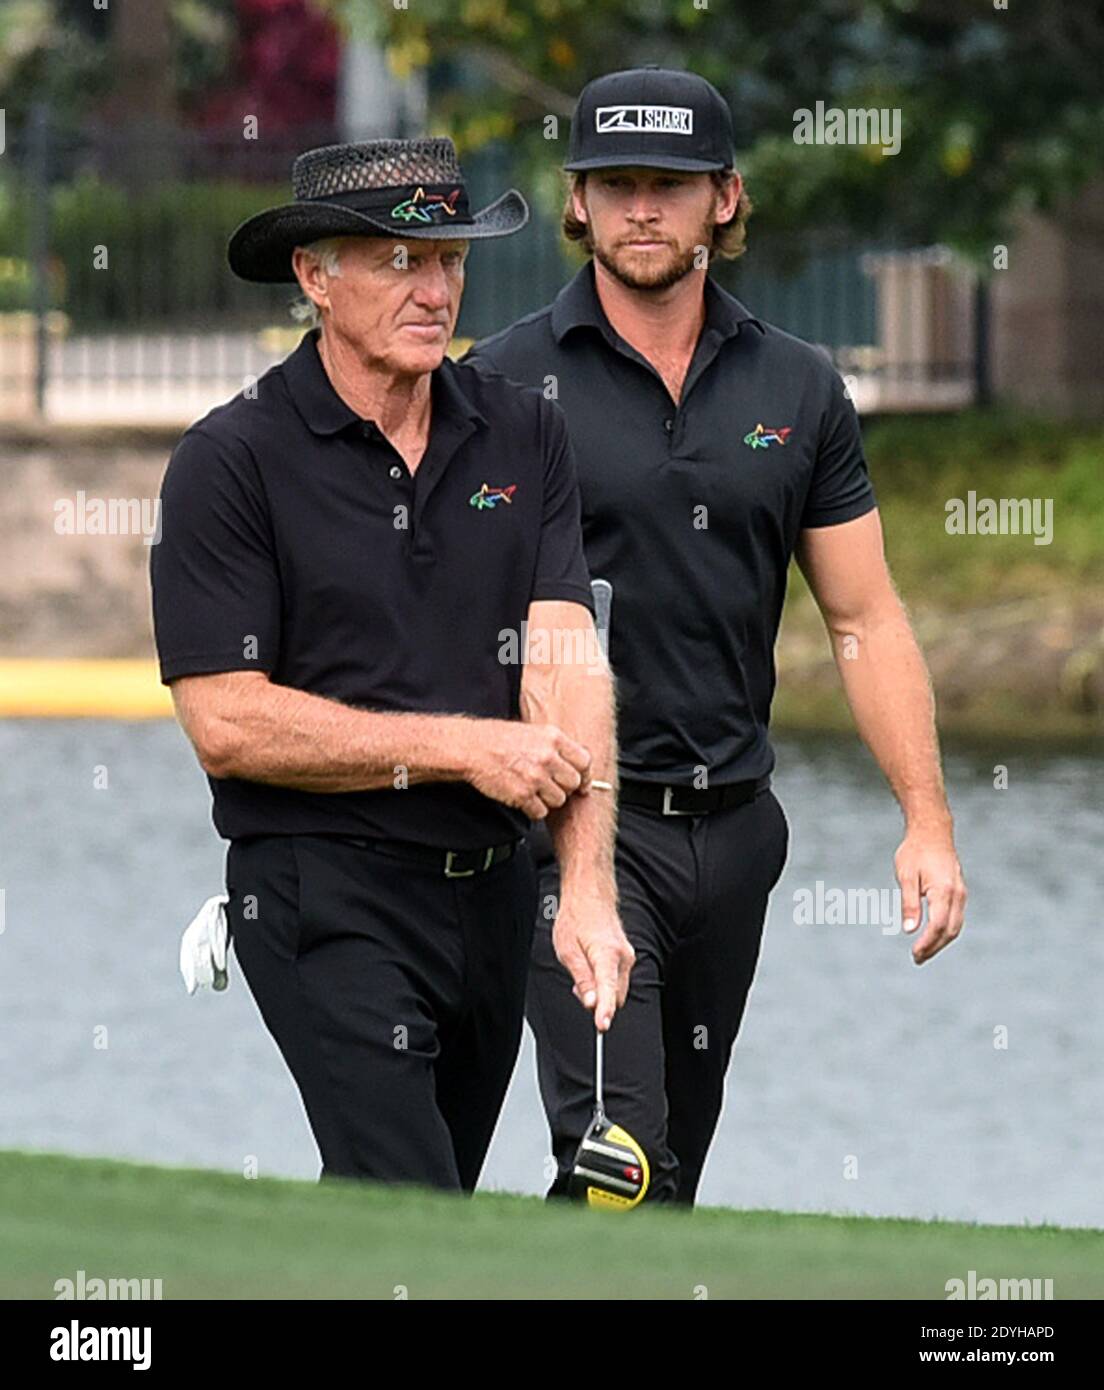 December 20, 2020 - Orlando, Florida, United States - Australian Greg Norman (left) and his son, Greg Norman Jr. approach the 18th green during the final round at the PNC Championship golf tournament at the Ritz-Carlton Golf Club on December 20, 2020 in Orlando, Florida. On Christmas Day, Norman posted a photo to Instagram from a hospital bed where he was being treated for COVID-19 symptoms. NormanÕs son also posted a photo to Instagram, stating that he and his fiancee have tested positive for the COVID-19 virus. (Paul Hennessy/Alamy) Stock Photo